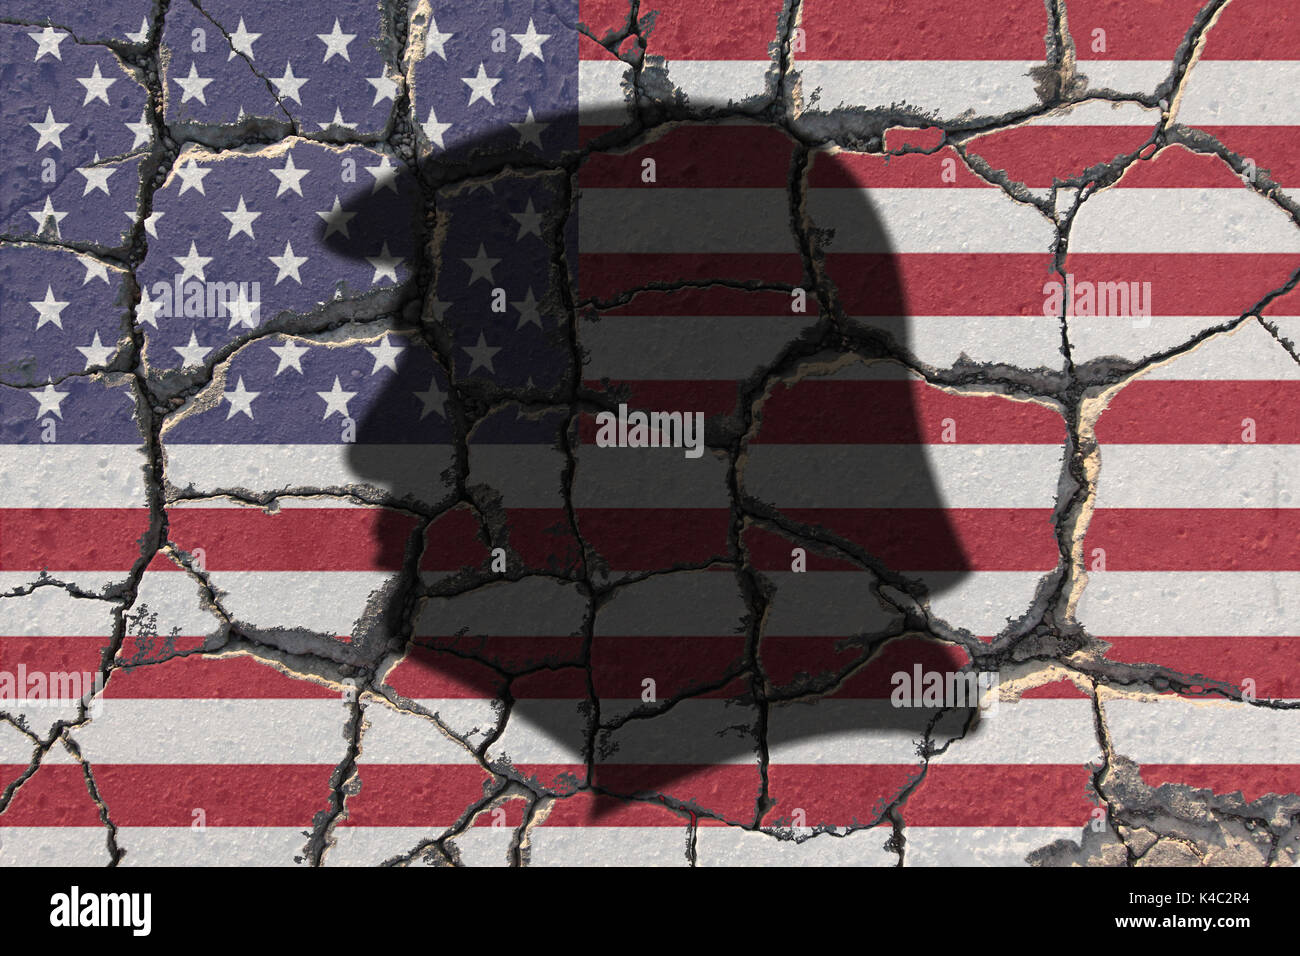 Silhouette Of Donald Trump With Us And Germany On Eroding Ground Stock Photo